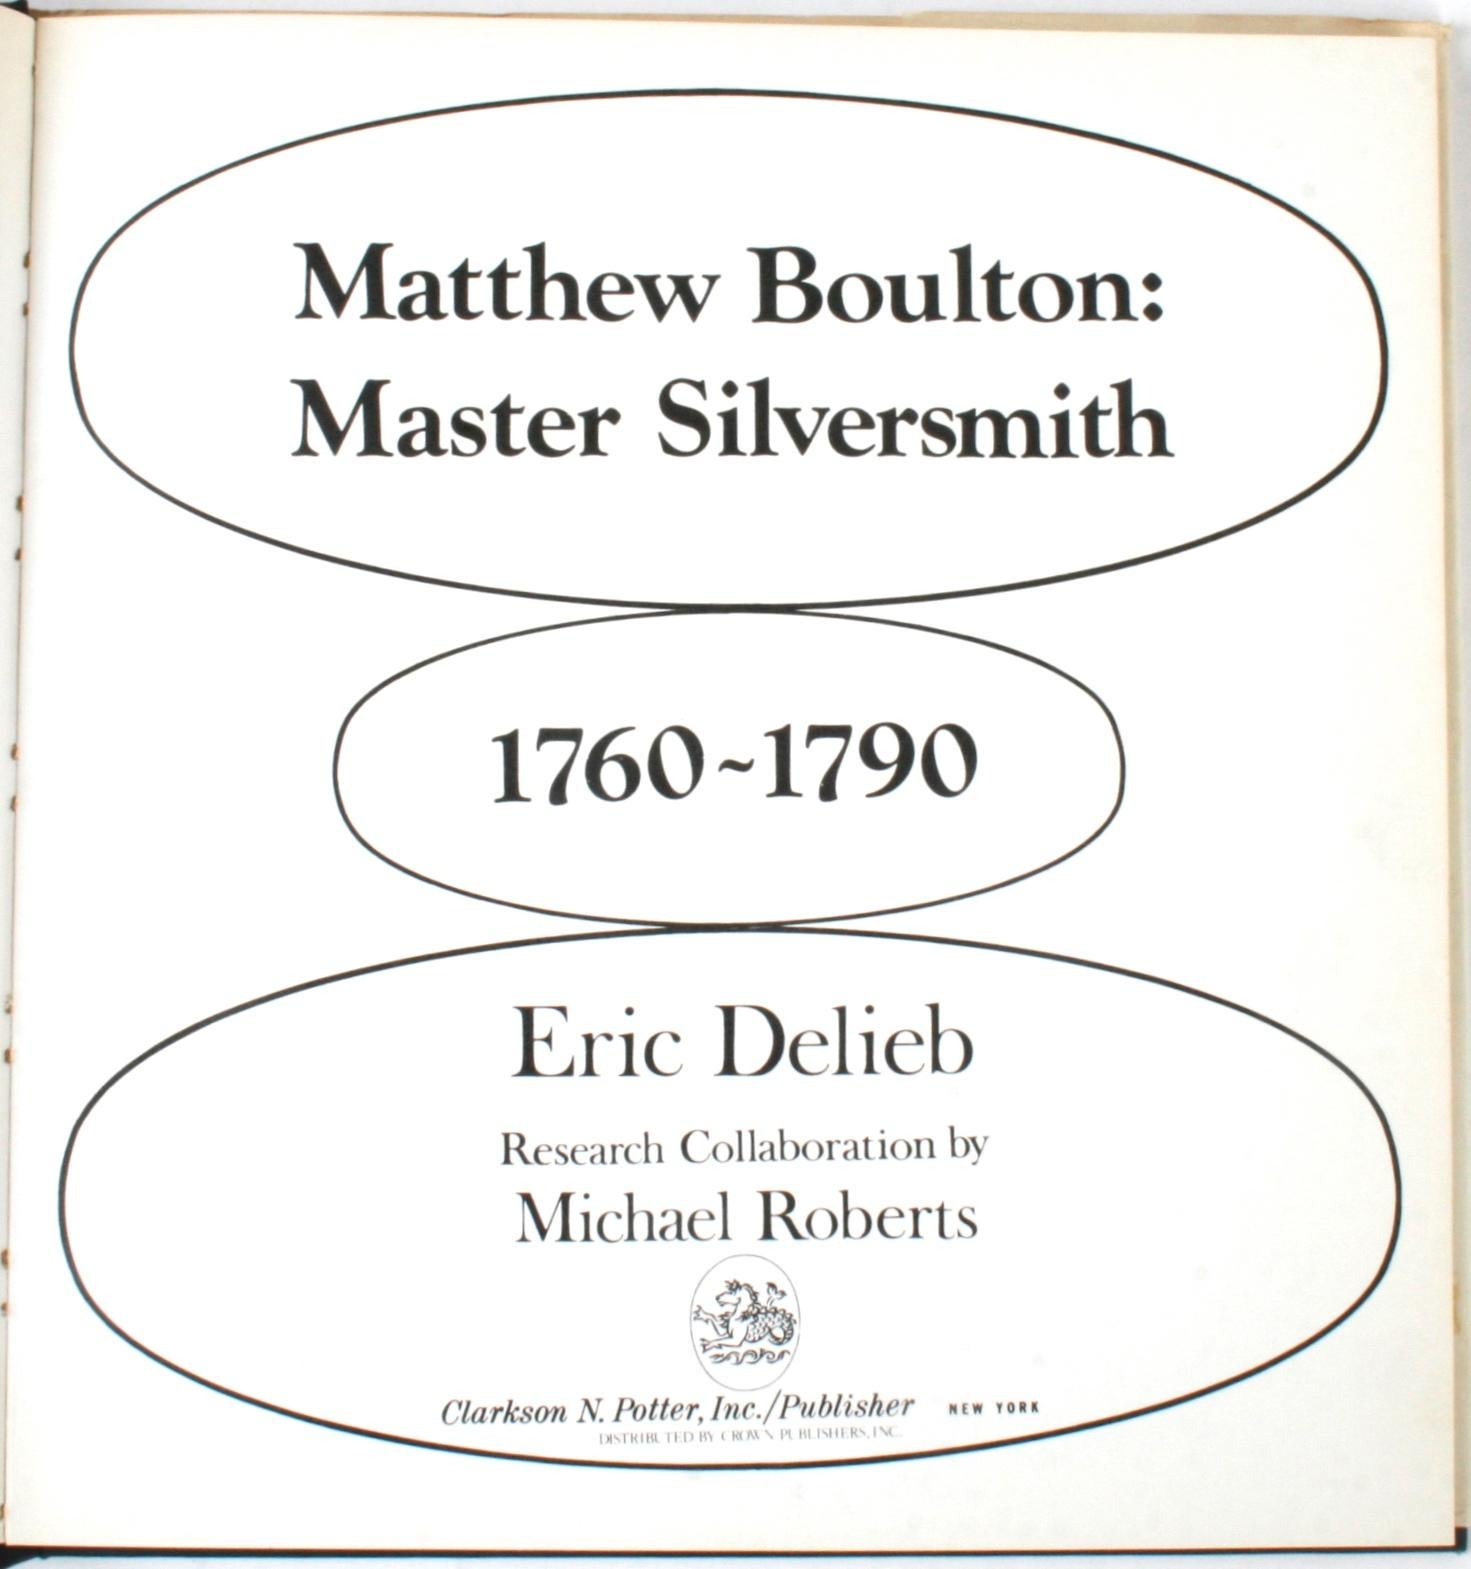 Matthew Boulton Master silversmith 1760-1790 by Eric Delieb and Michael Roberts. New York: Clarkson N. Potter, Inc., 1971. First edition hardcover with dust jacket. 144 pp. A study of the superb silver and Sheffield plate produced by Matthew Boulton